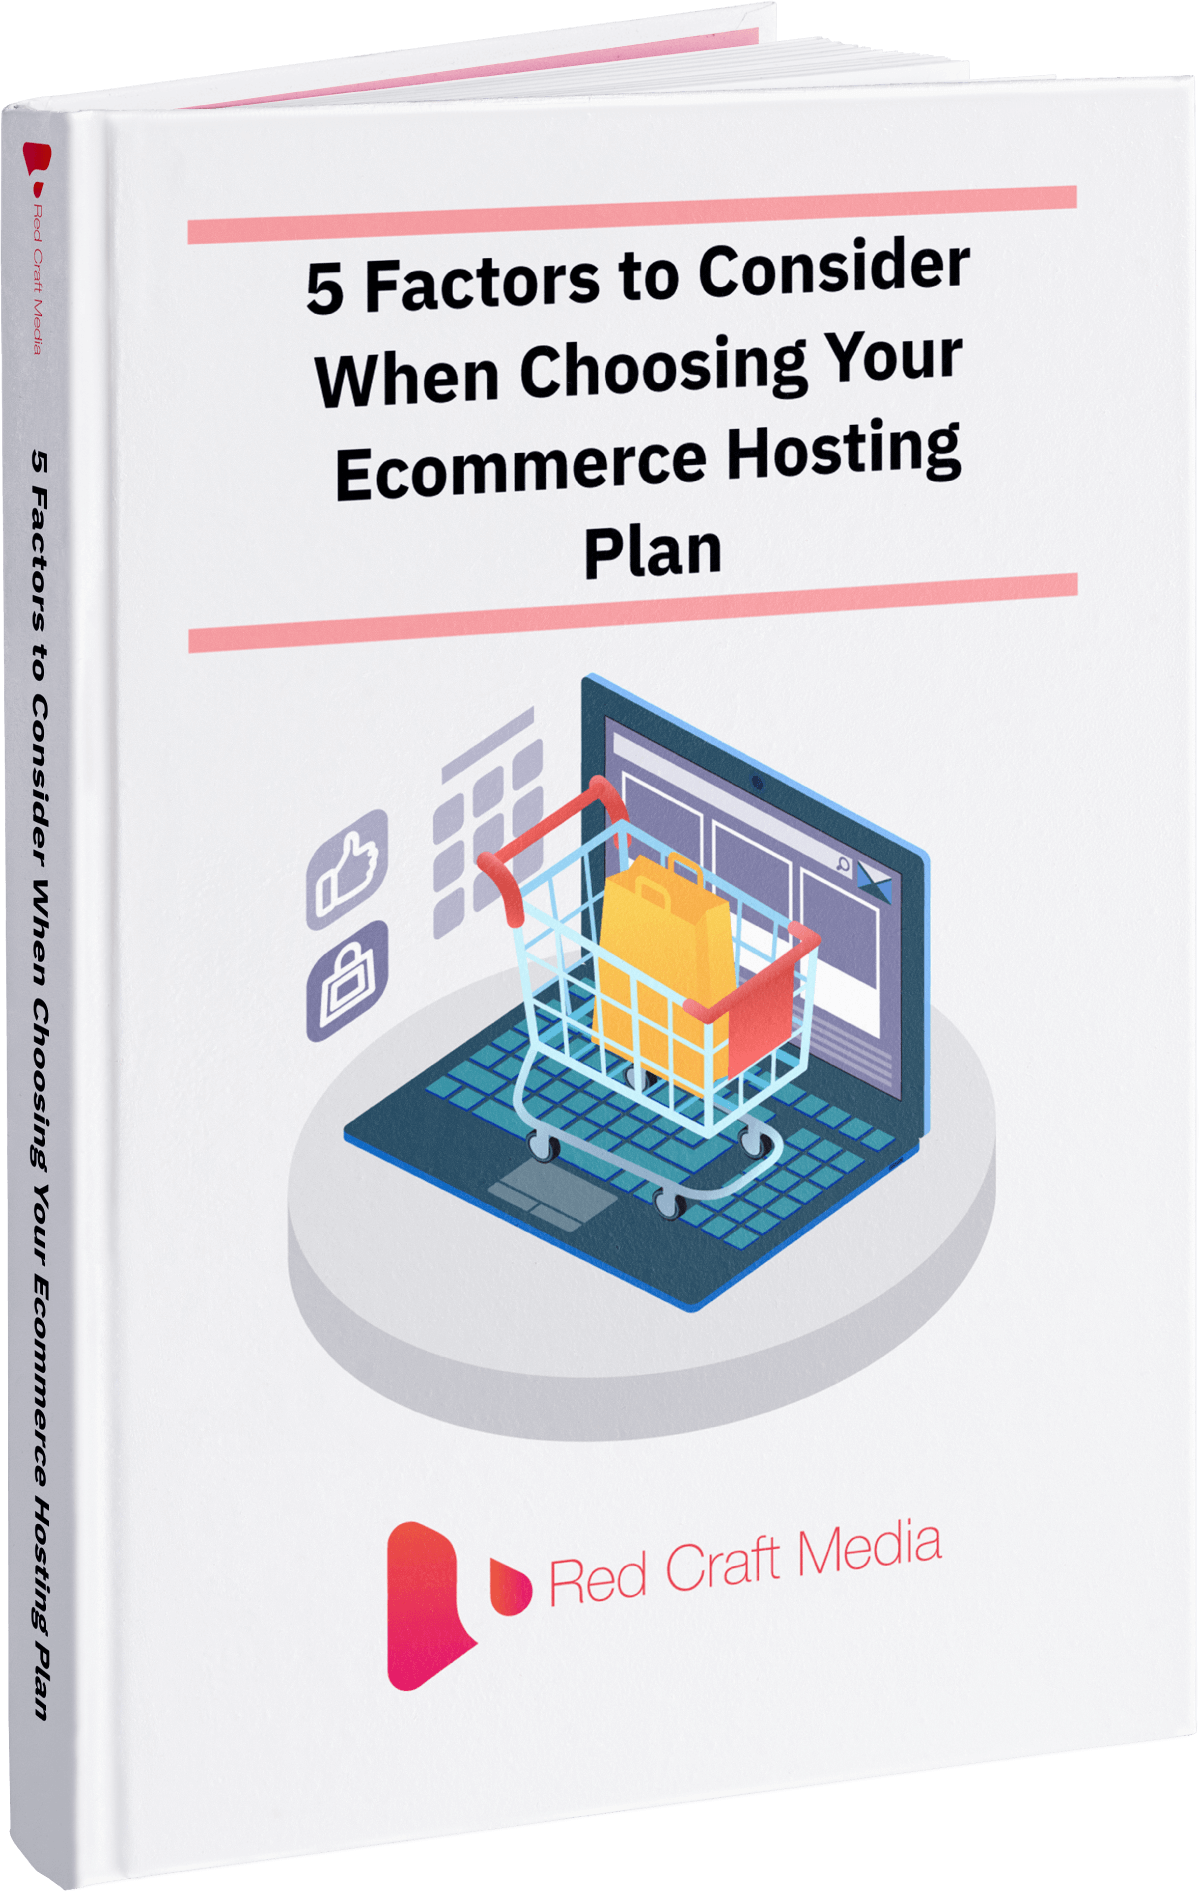 5 Factors to Consider When Choosing Your Ecommerce Hosting Plan